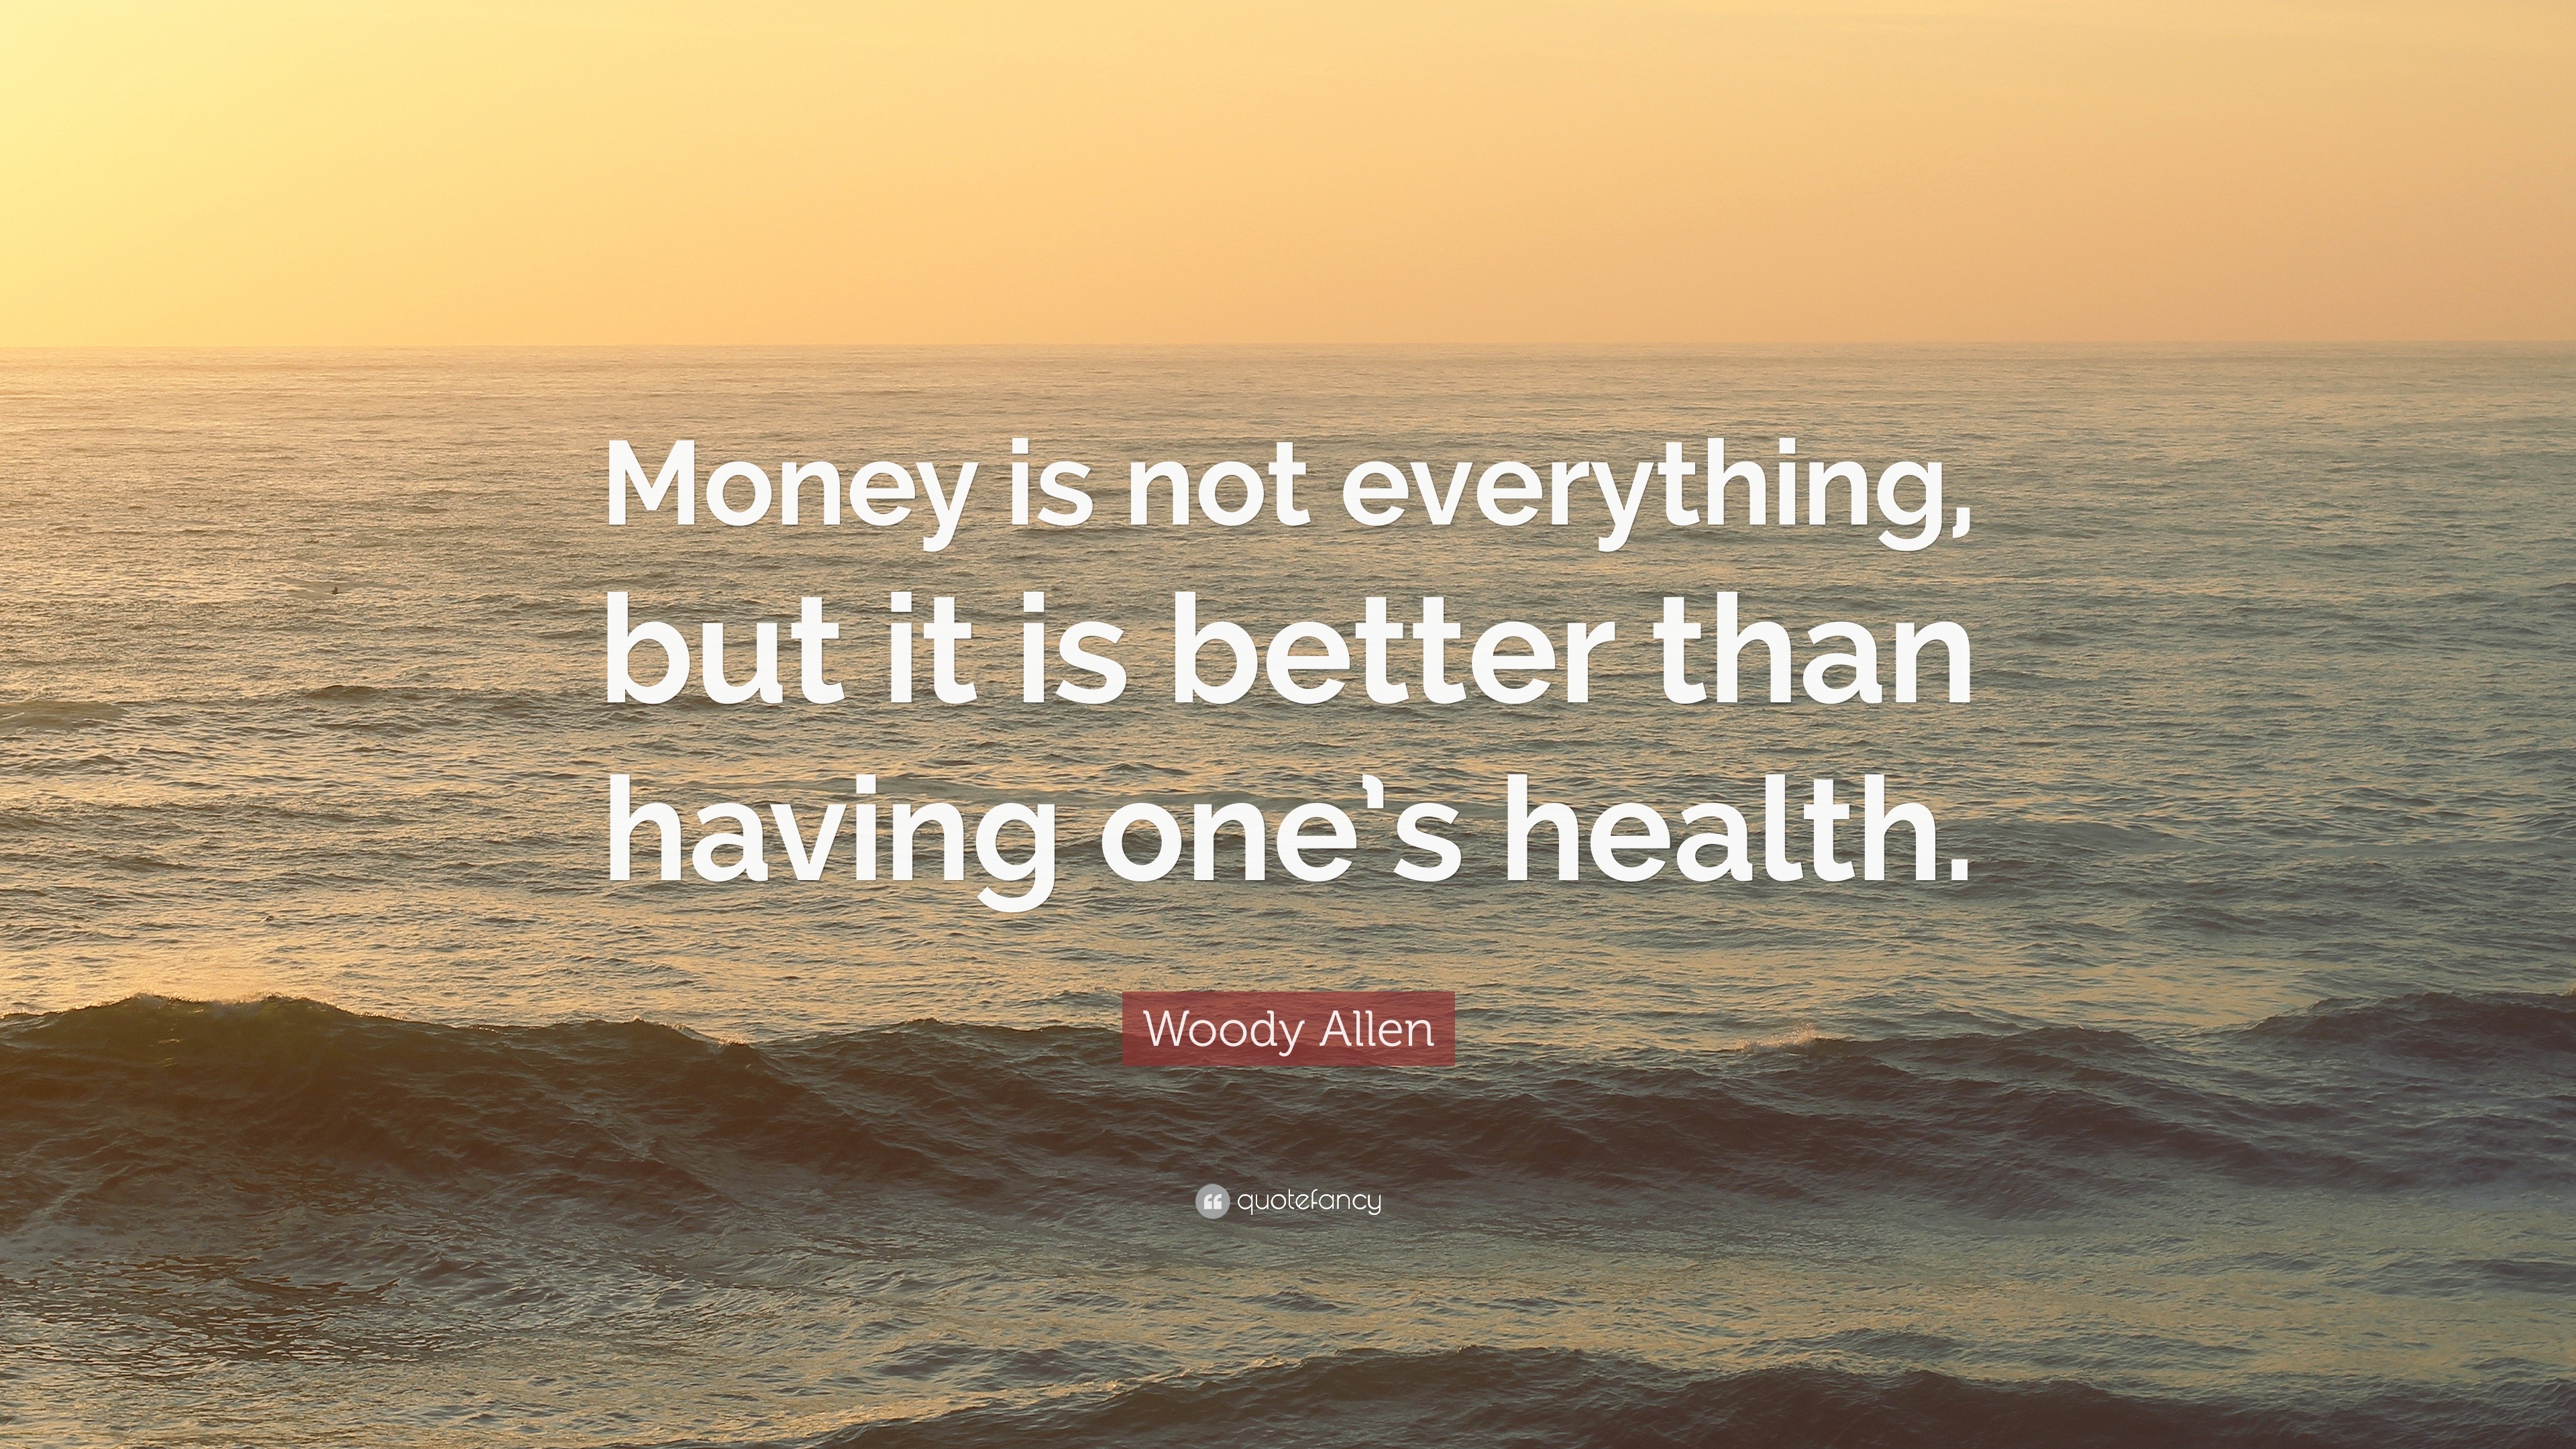 Woody Allen Quote: "Money is not everything, but it is better than having one's health."